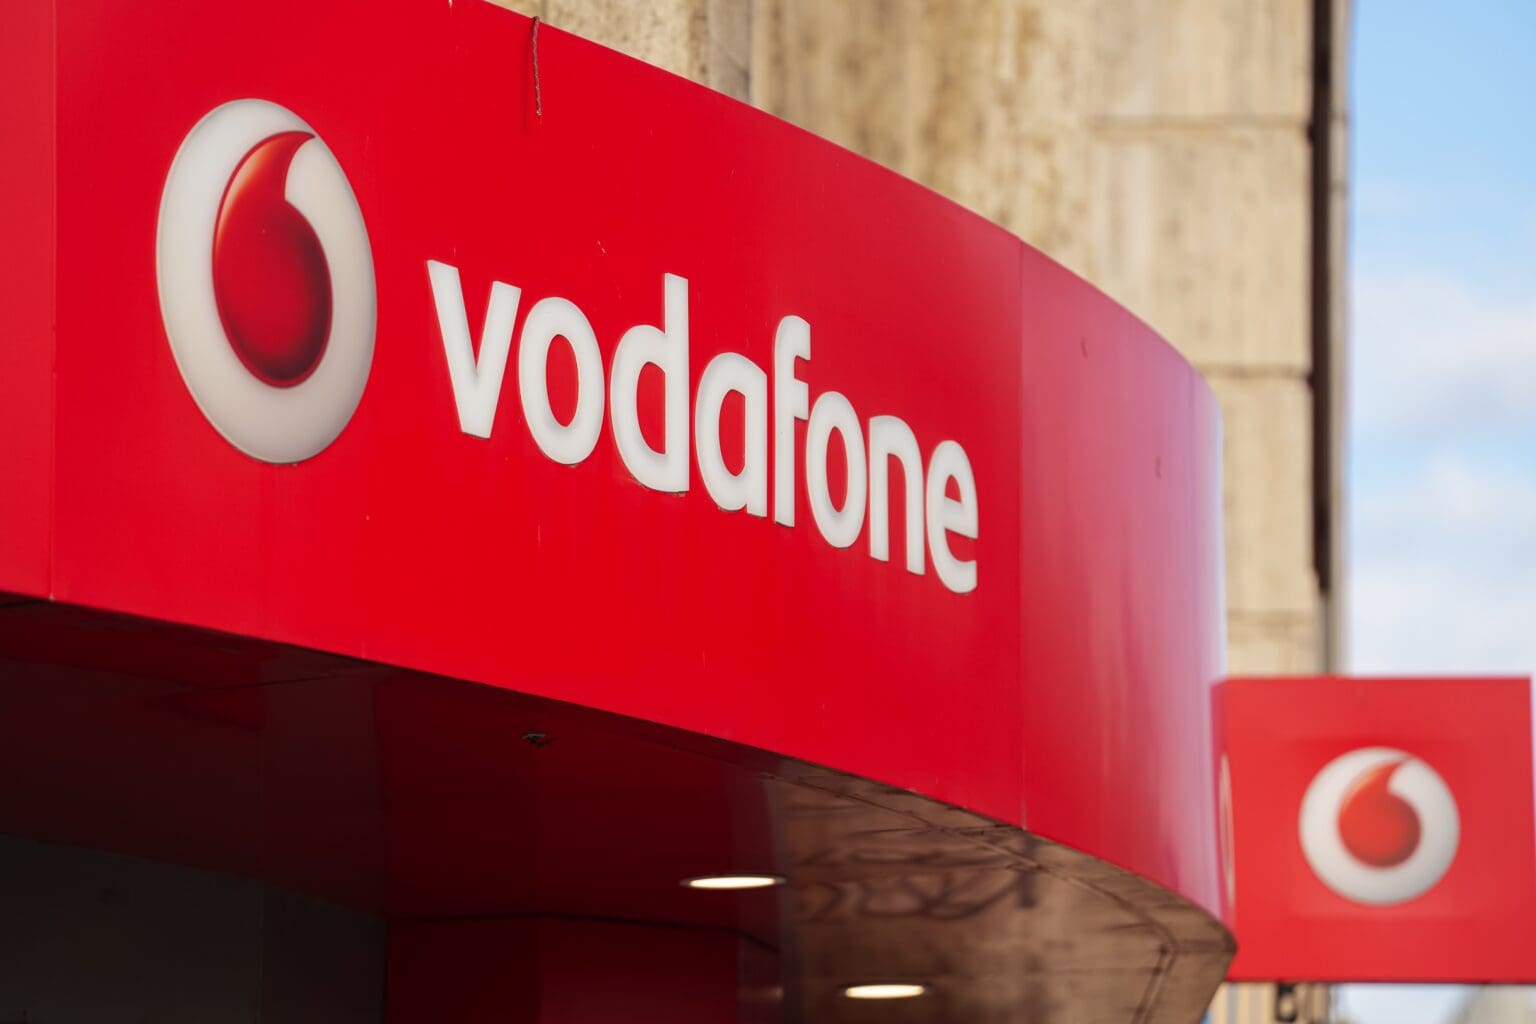 Vodafone Hungary Set to Be Acquired For 660 Billion HUF